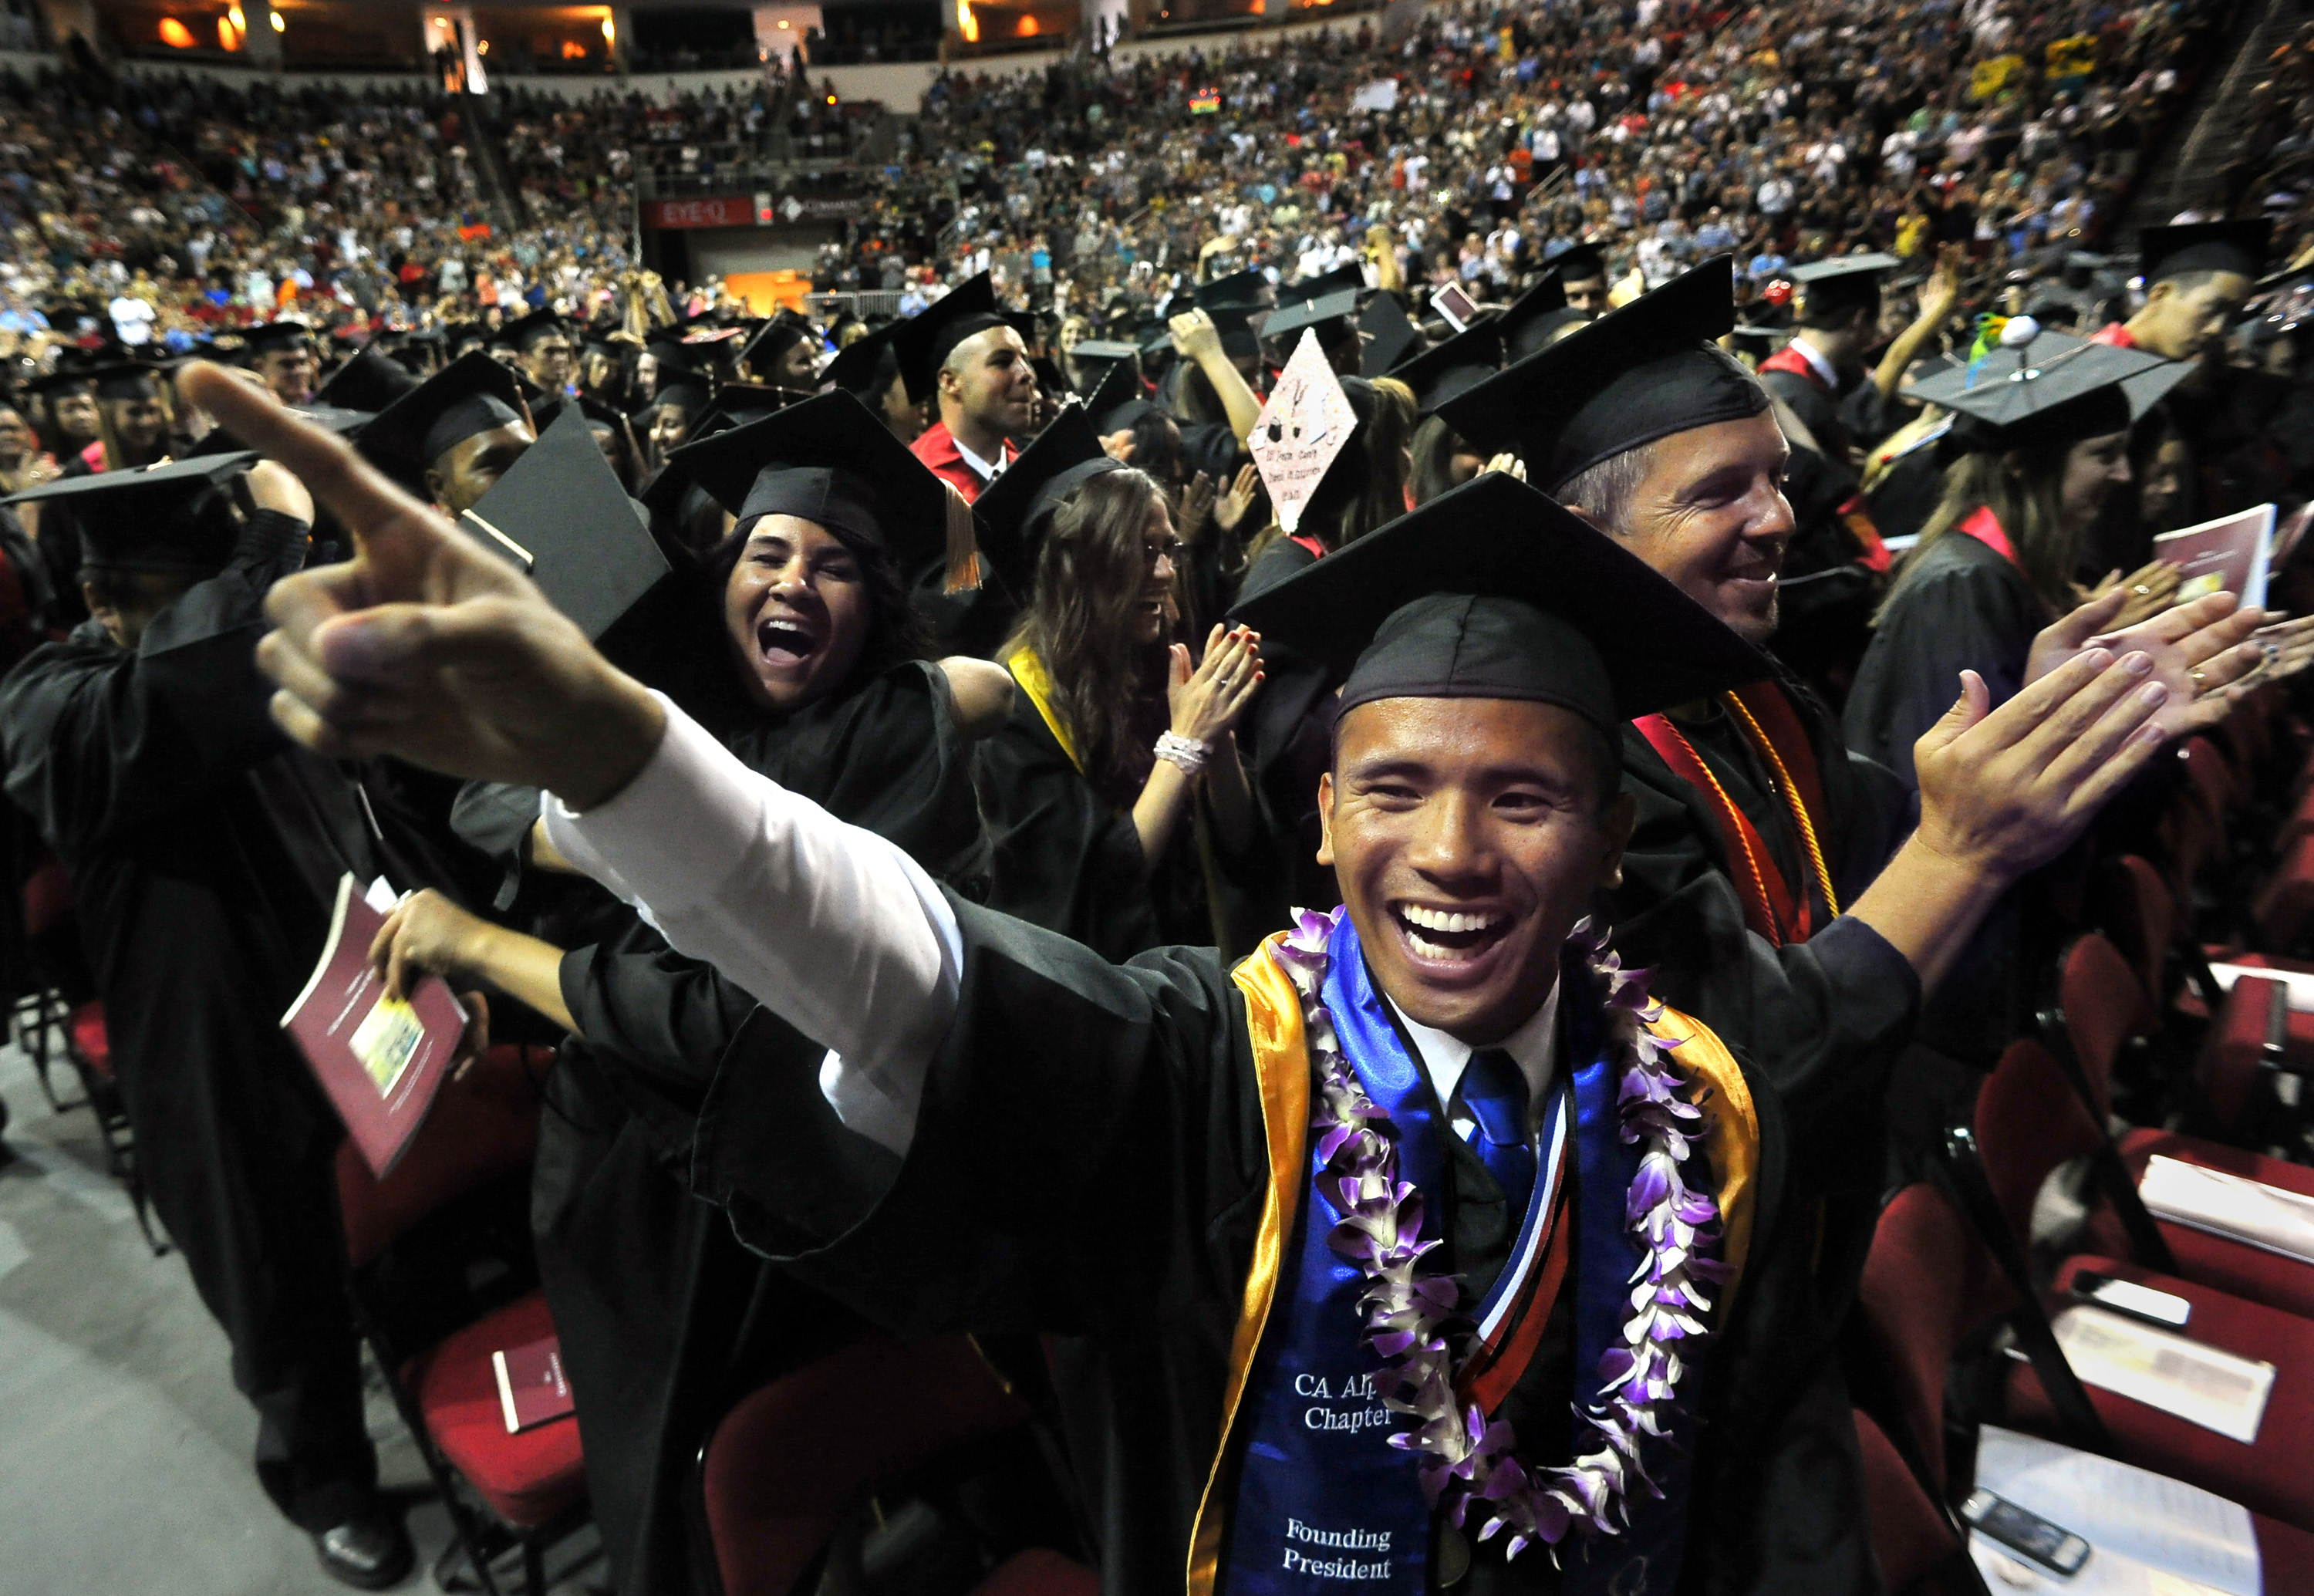 Junrel Sumagang gestures to family as he celebrates receiving his Bachelor of Science degree in nursing at the conclusion of Fresno State University's 101st Commencement at the Save Mart Center in Fresno, California, on Saturday, May 19, 2012. (John Walker/Fresno Bee/MCT)